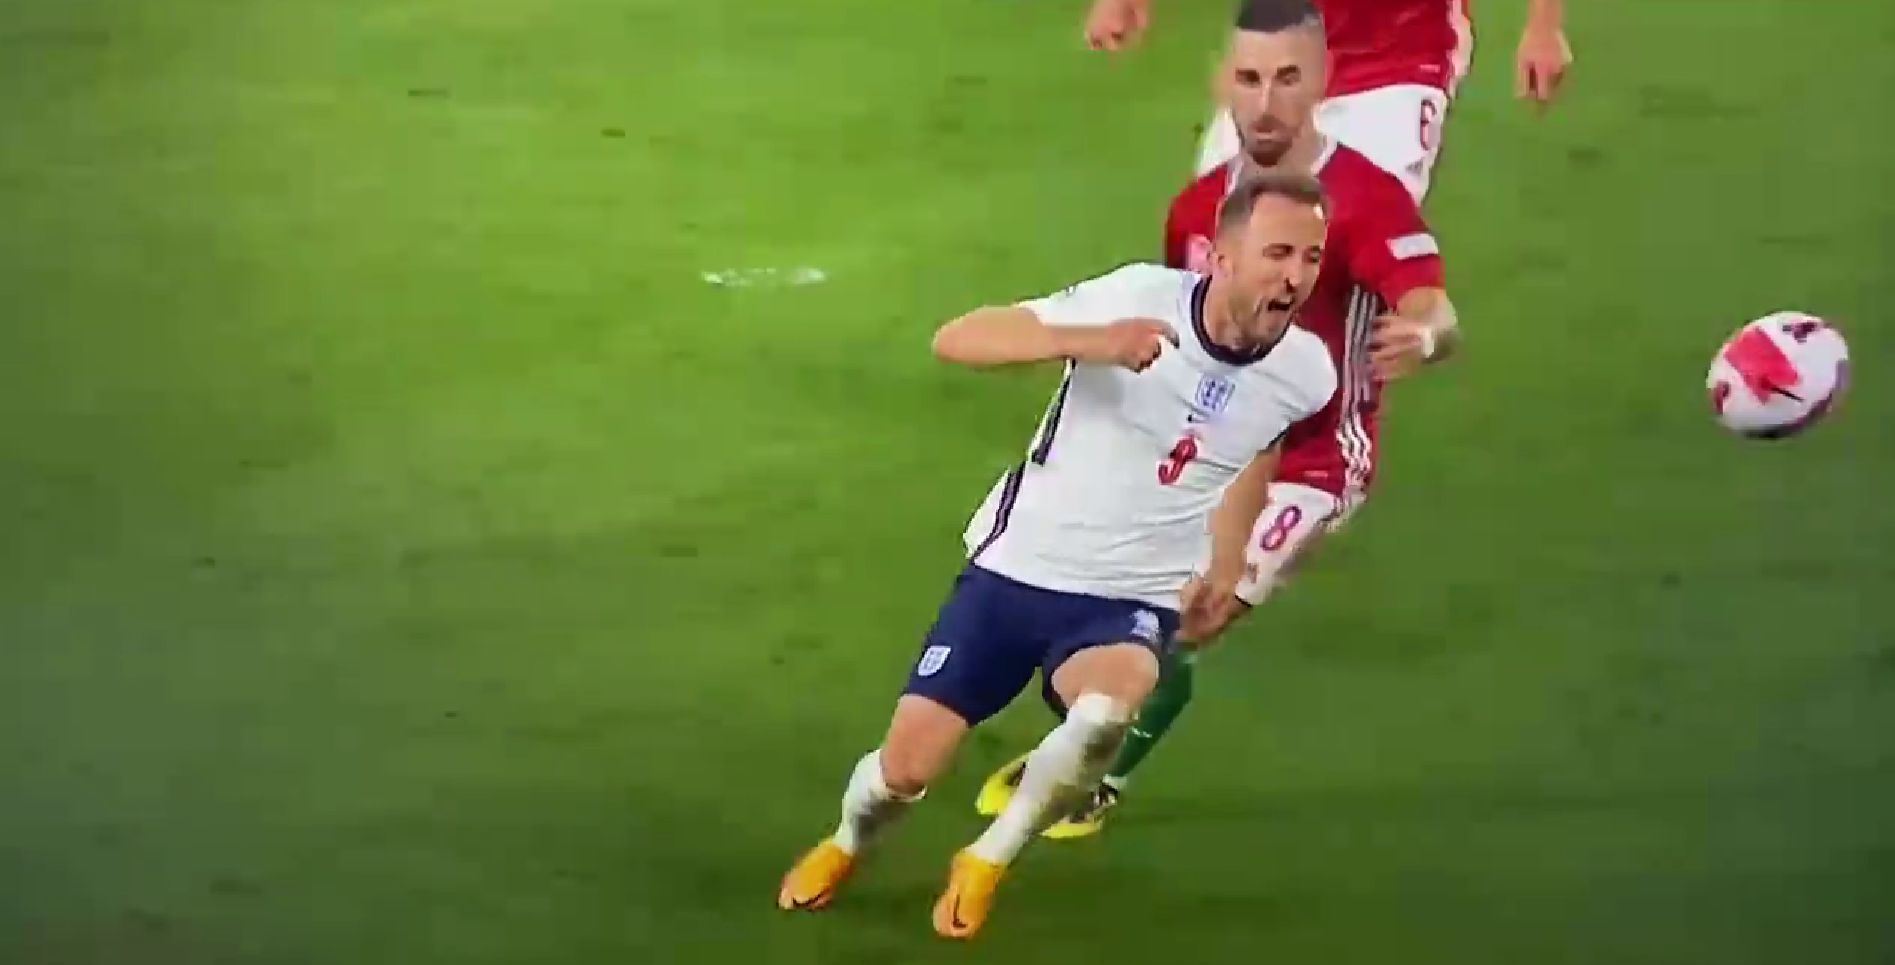 (Video) LFC fans all saying same thing about Harry Kane’s embarrassing dive